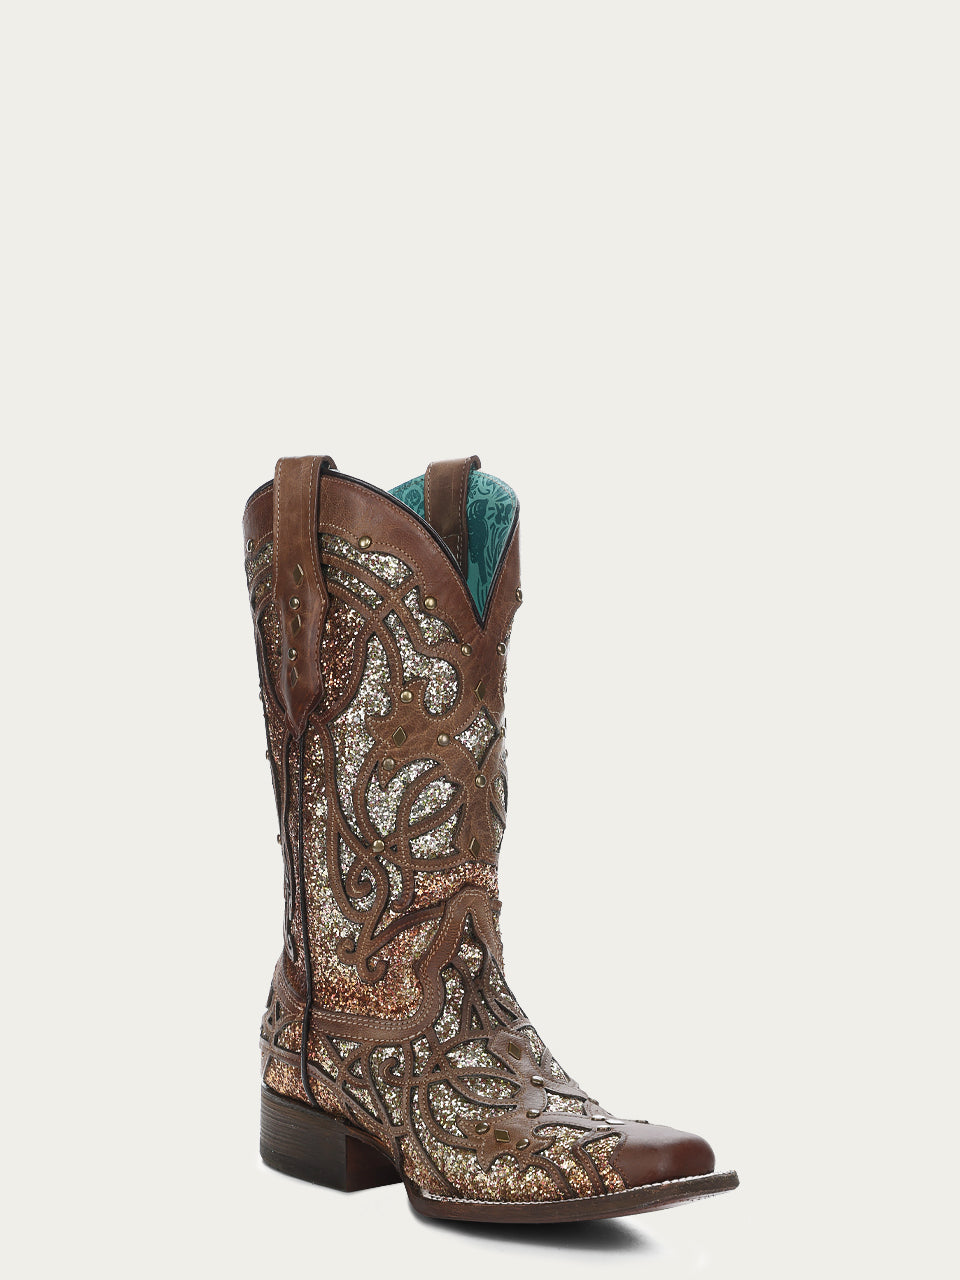 C3275 - WOMEN'S ORIX GLITTERED INLAY AND STUDS BROWN SQUARE TOE COWBOY BOOT